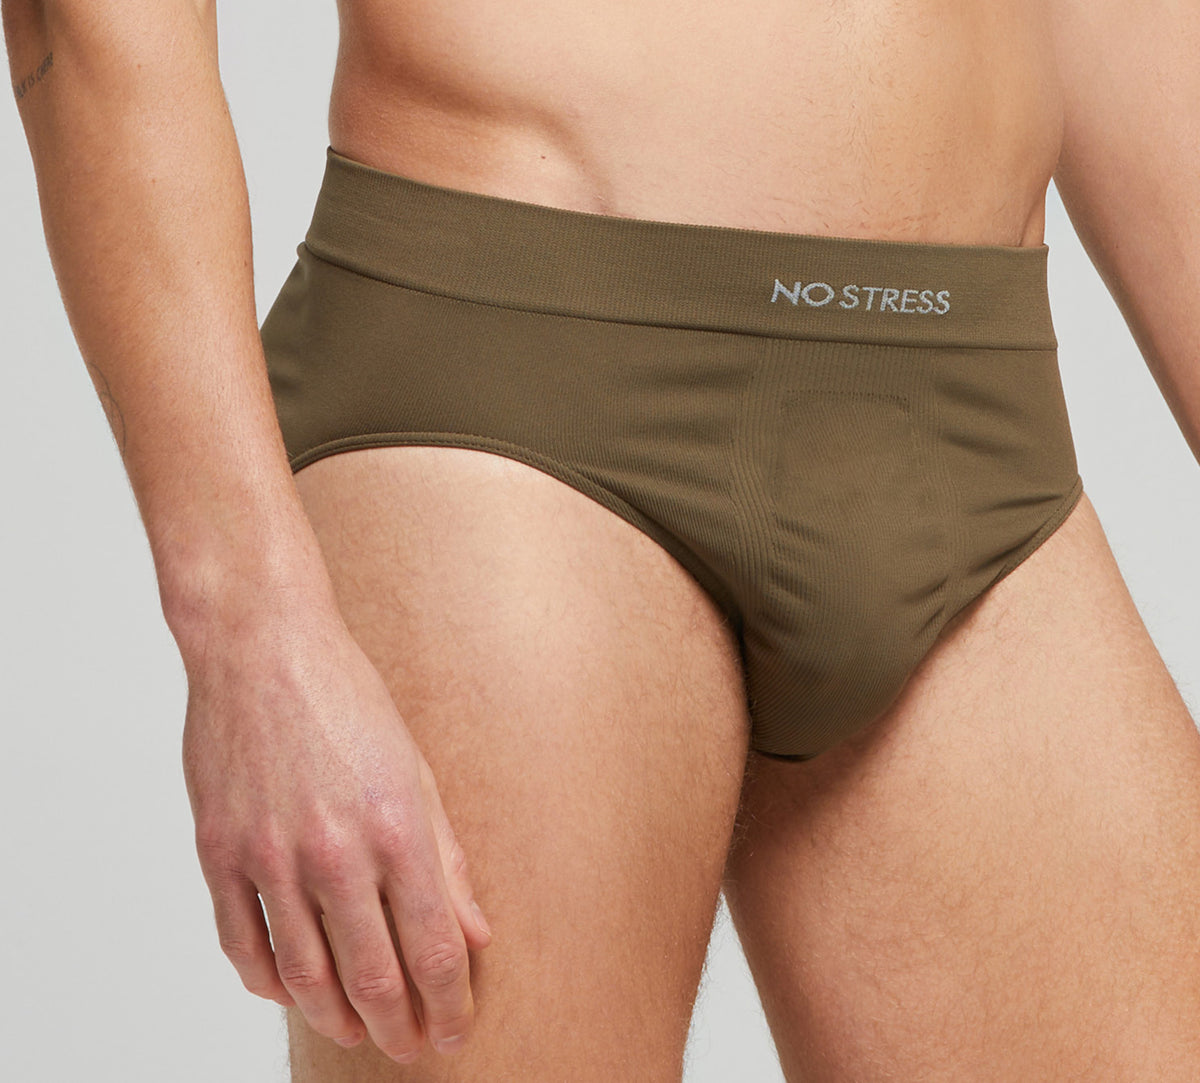 Hurry and grab your PUMP! classic underwear today